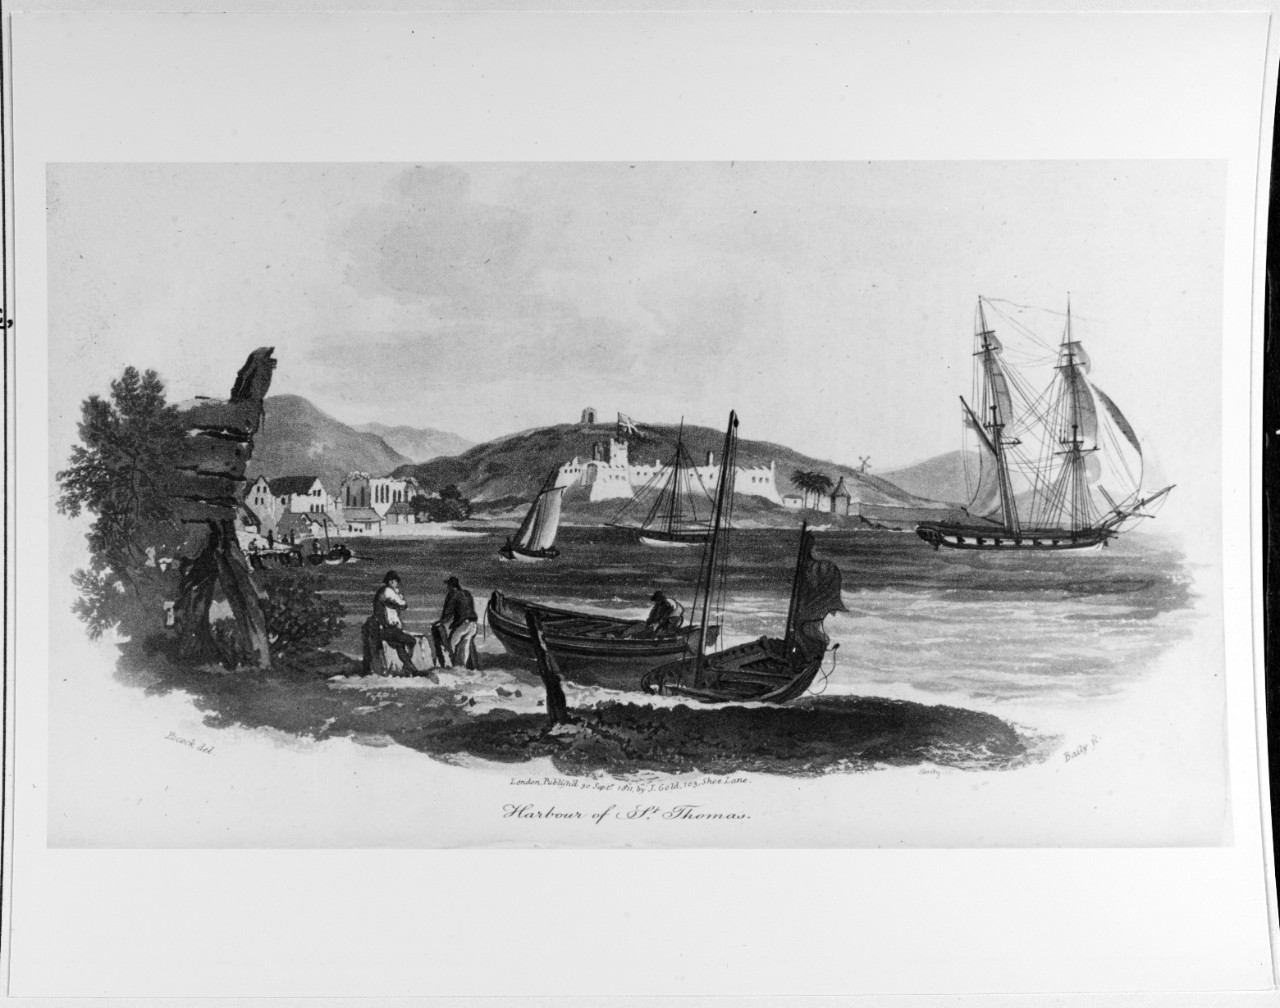 "Harbour of St. Thomas," in the West Indies.